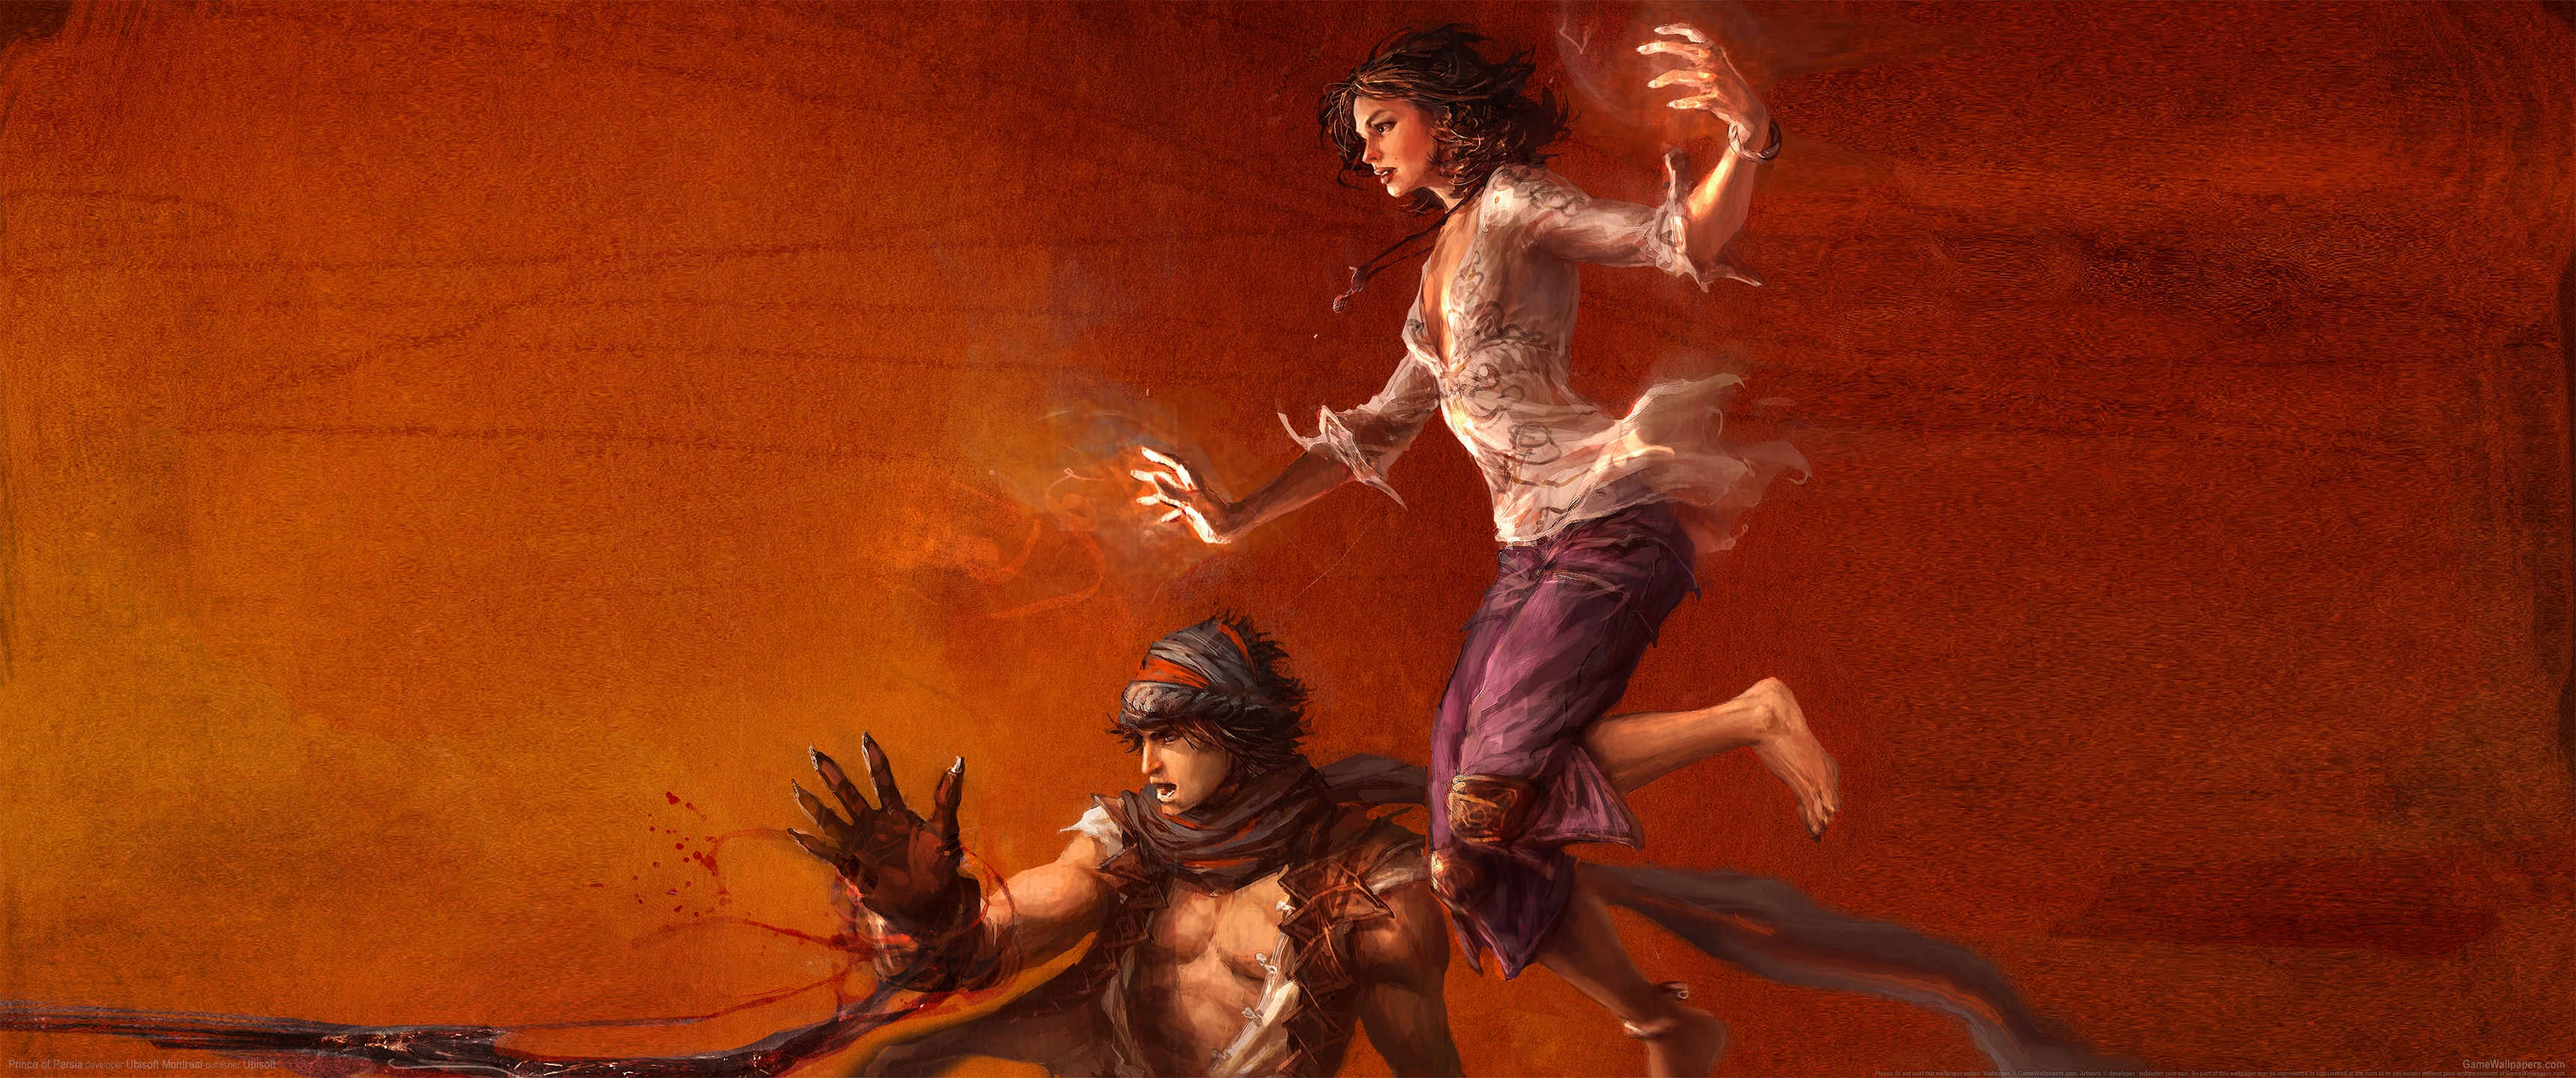 Prince of Persia 3440x1440 wallpaper or background 07